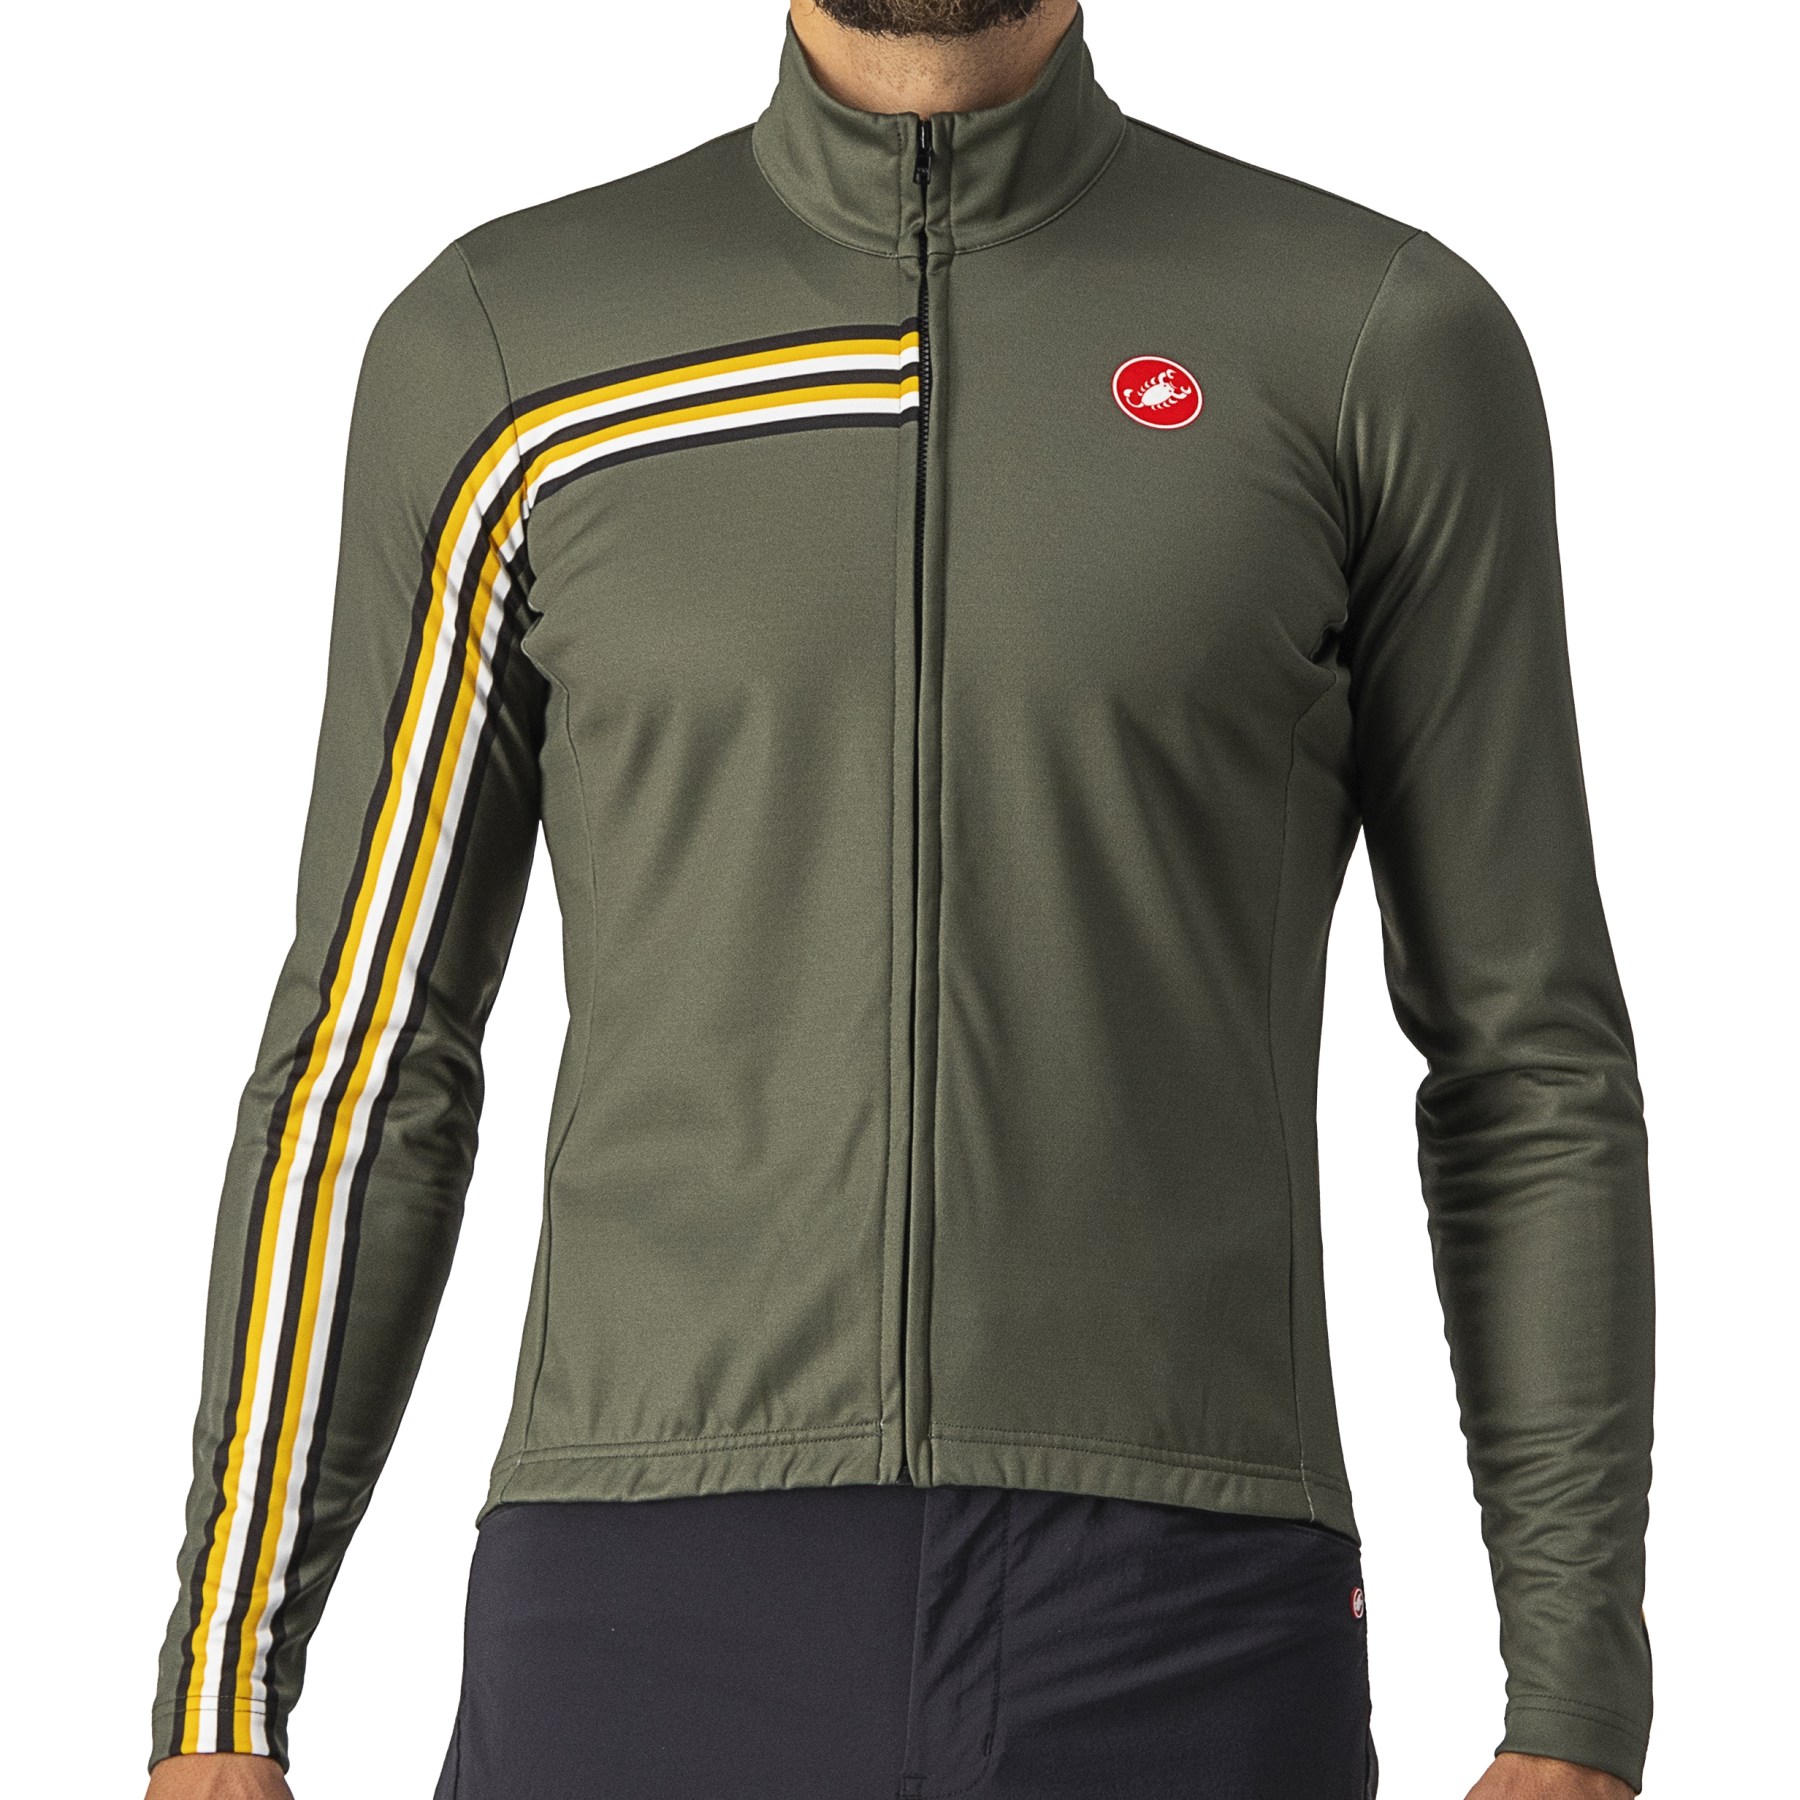 Picture of Castelli Unlimited Thermal Jersey - military green/goldenrod 075